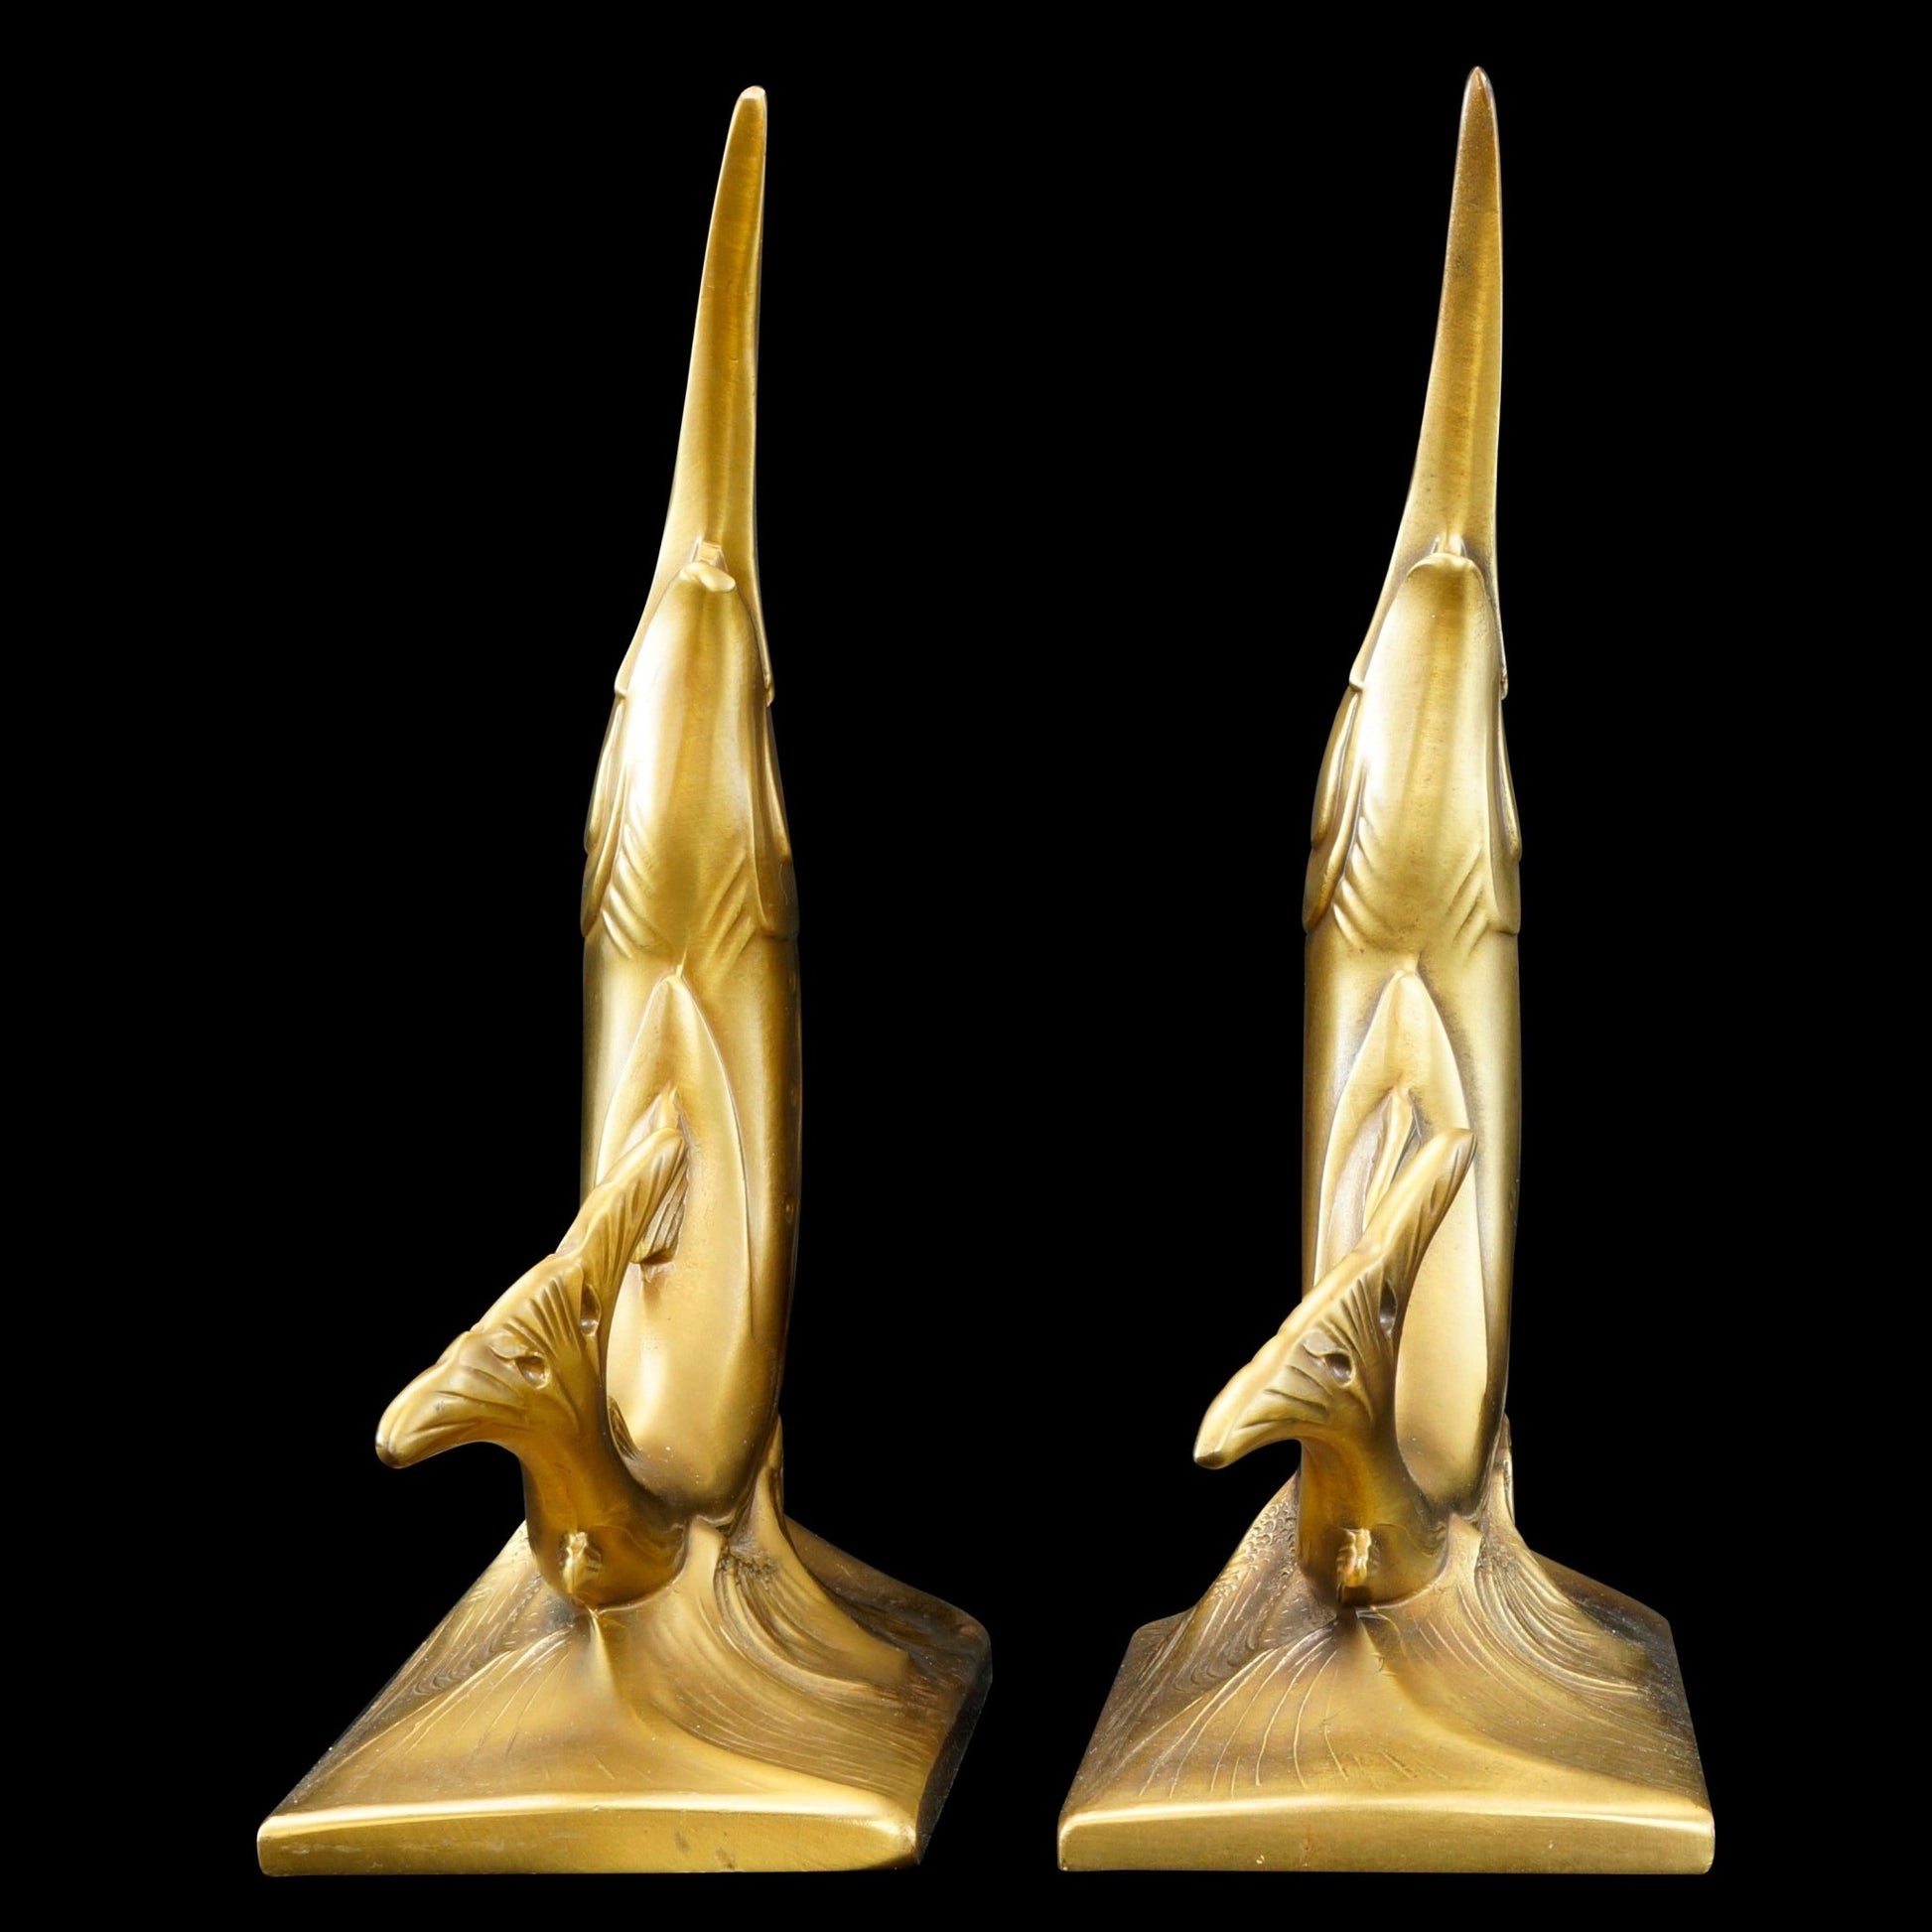 Mid Century Marlin Sailfish Bookends by PM Craftsman Circa 1965 - Bear and Raven Antiques